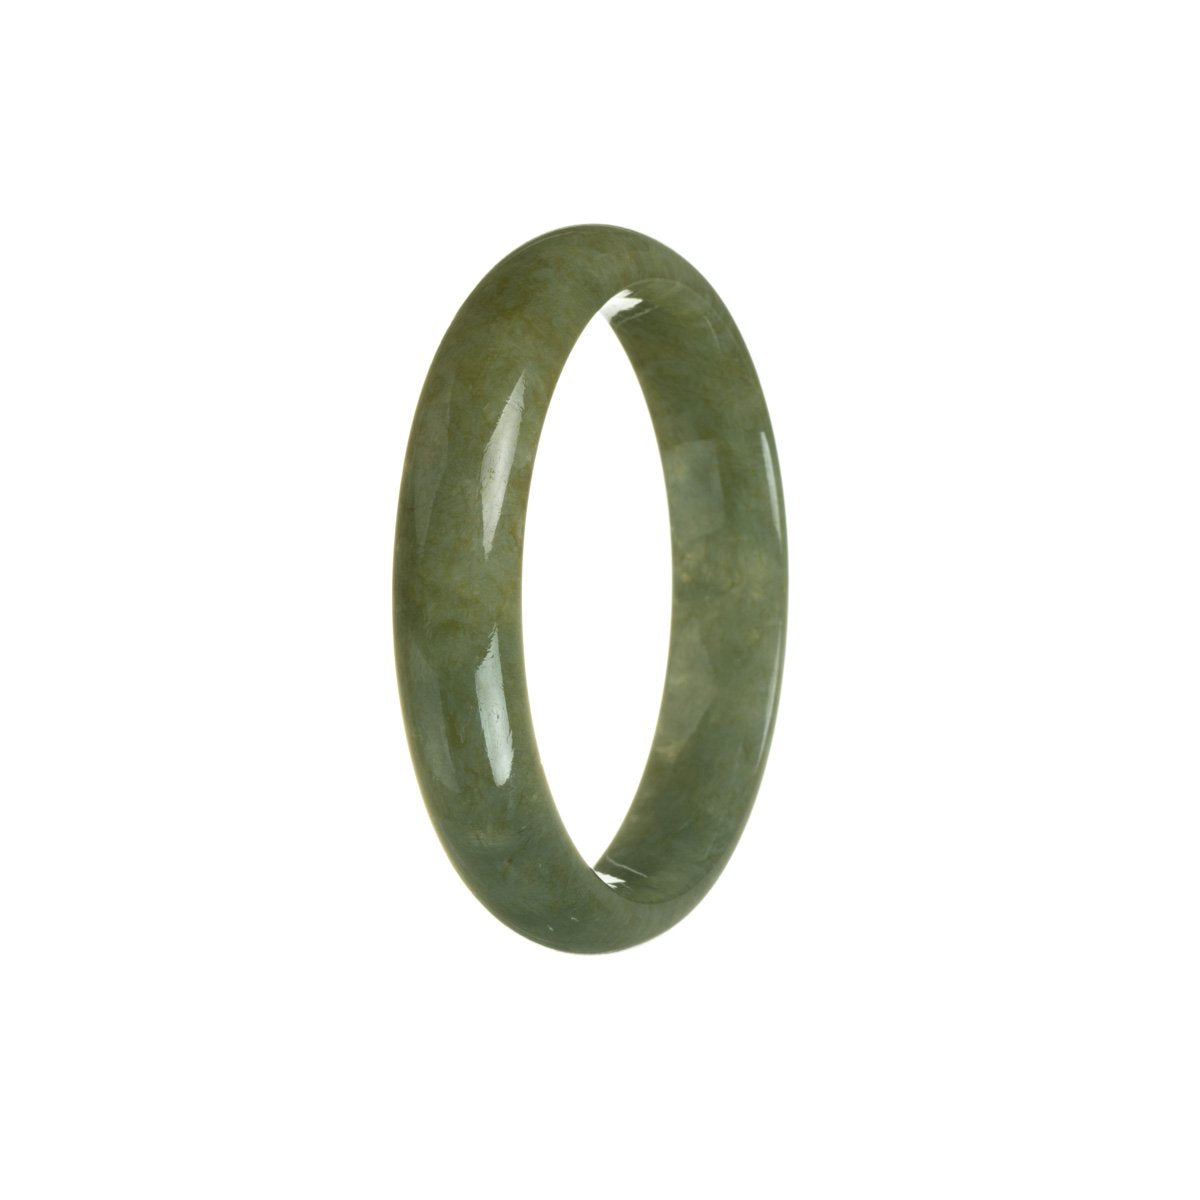 A half moon-shaped Burmese jade bangle in an authentic grade A brownish green hue from MAYS GEMS.